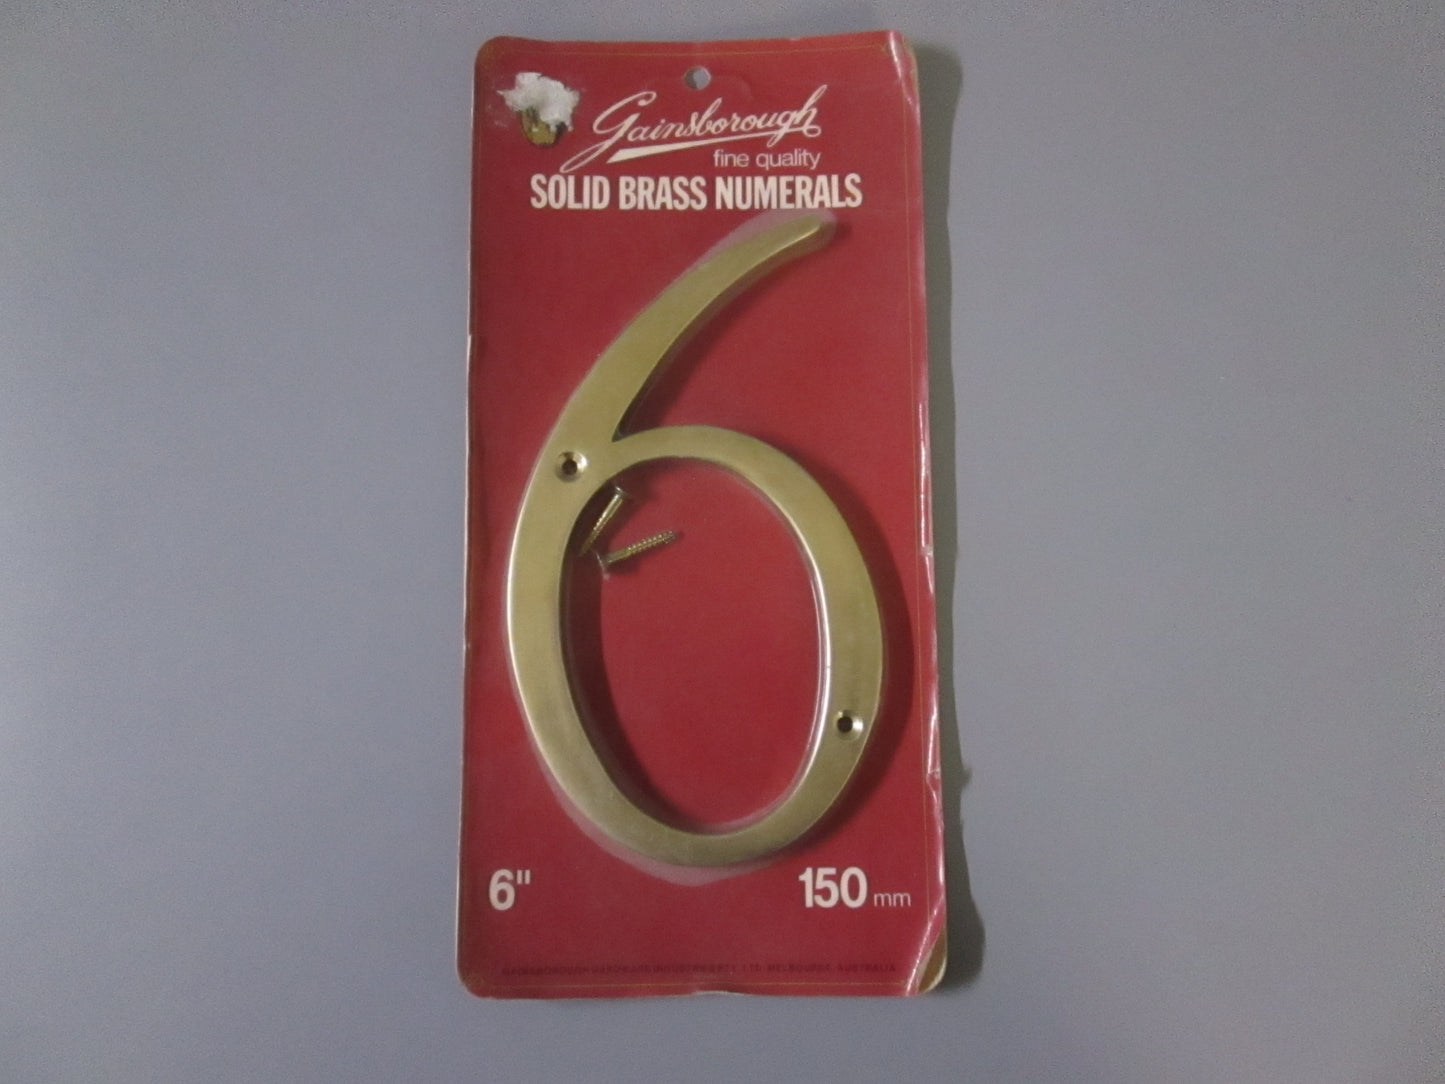 Gainsborough Primum 6 Inch House NUmber in Solid Brass